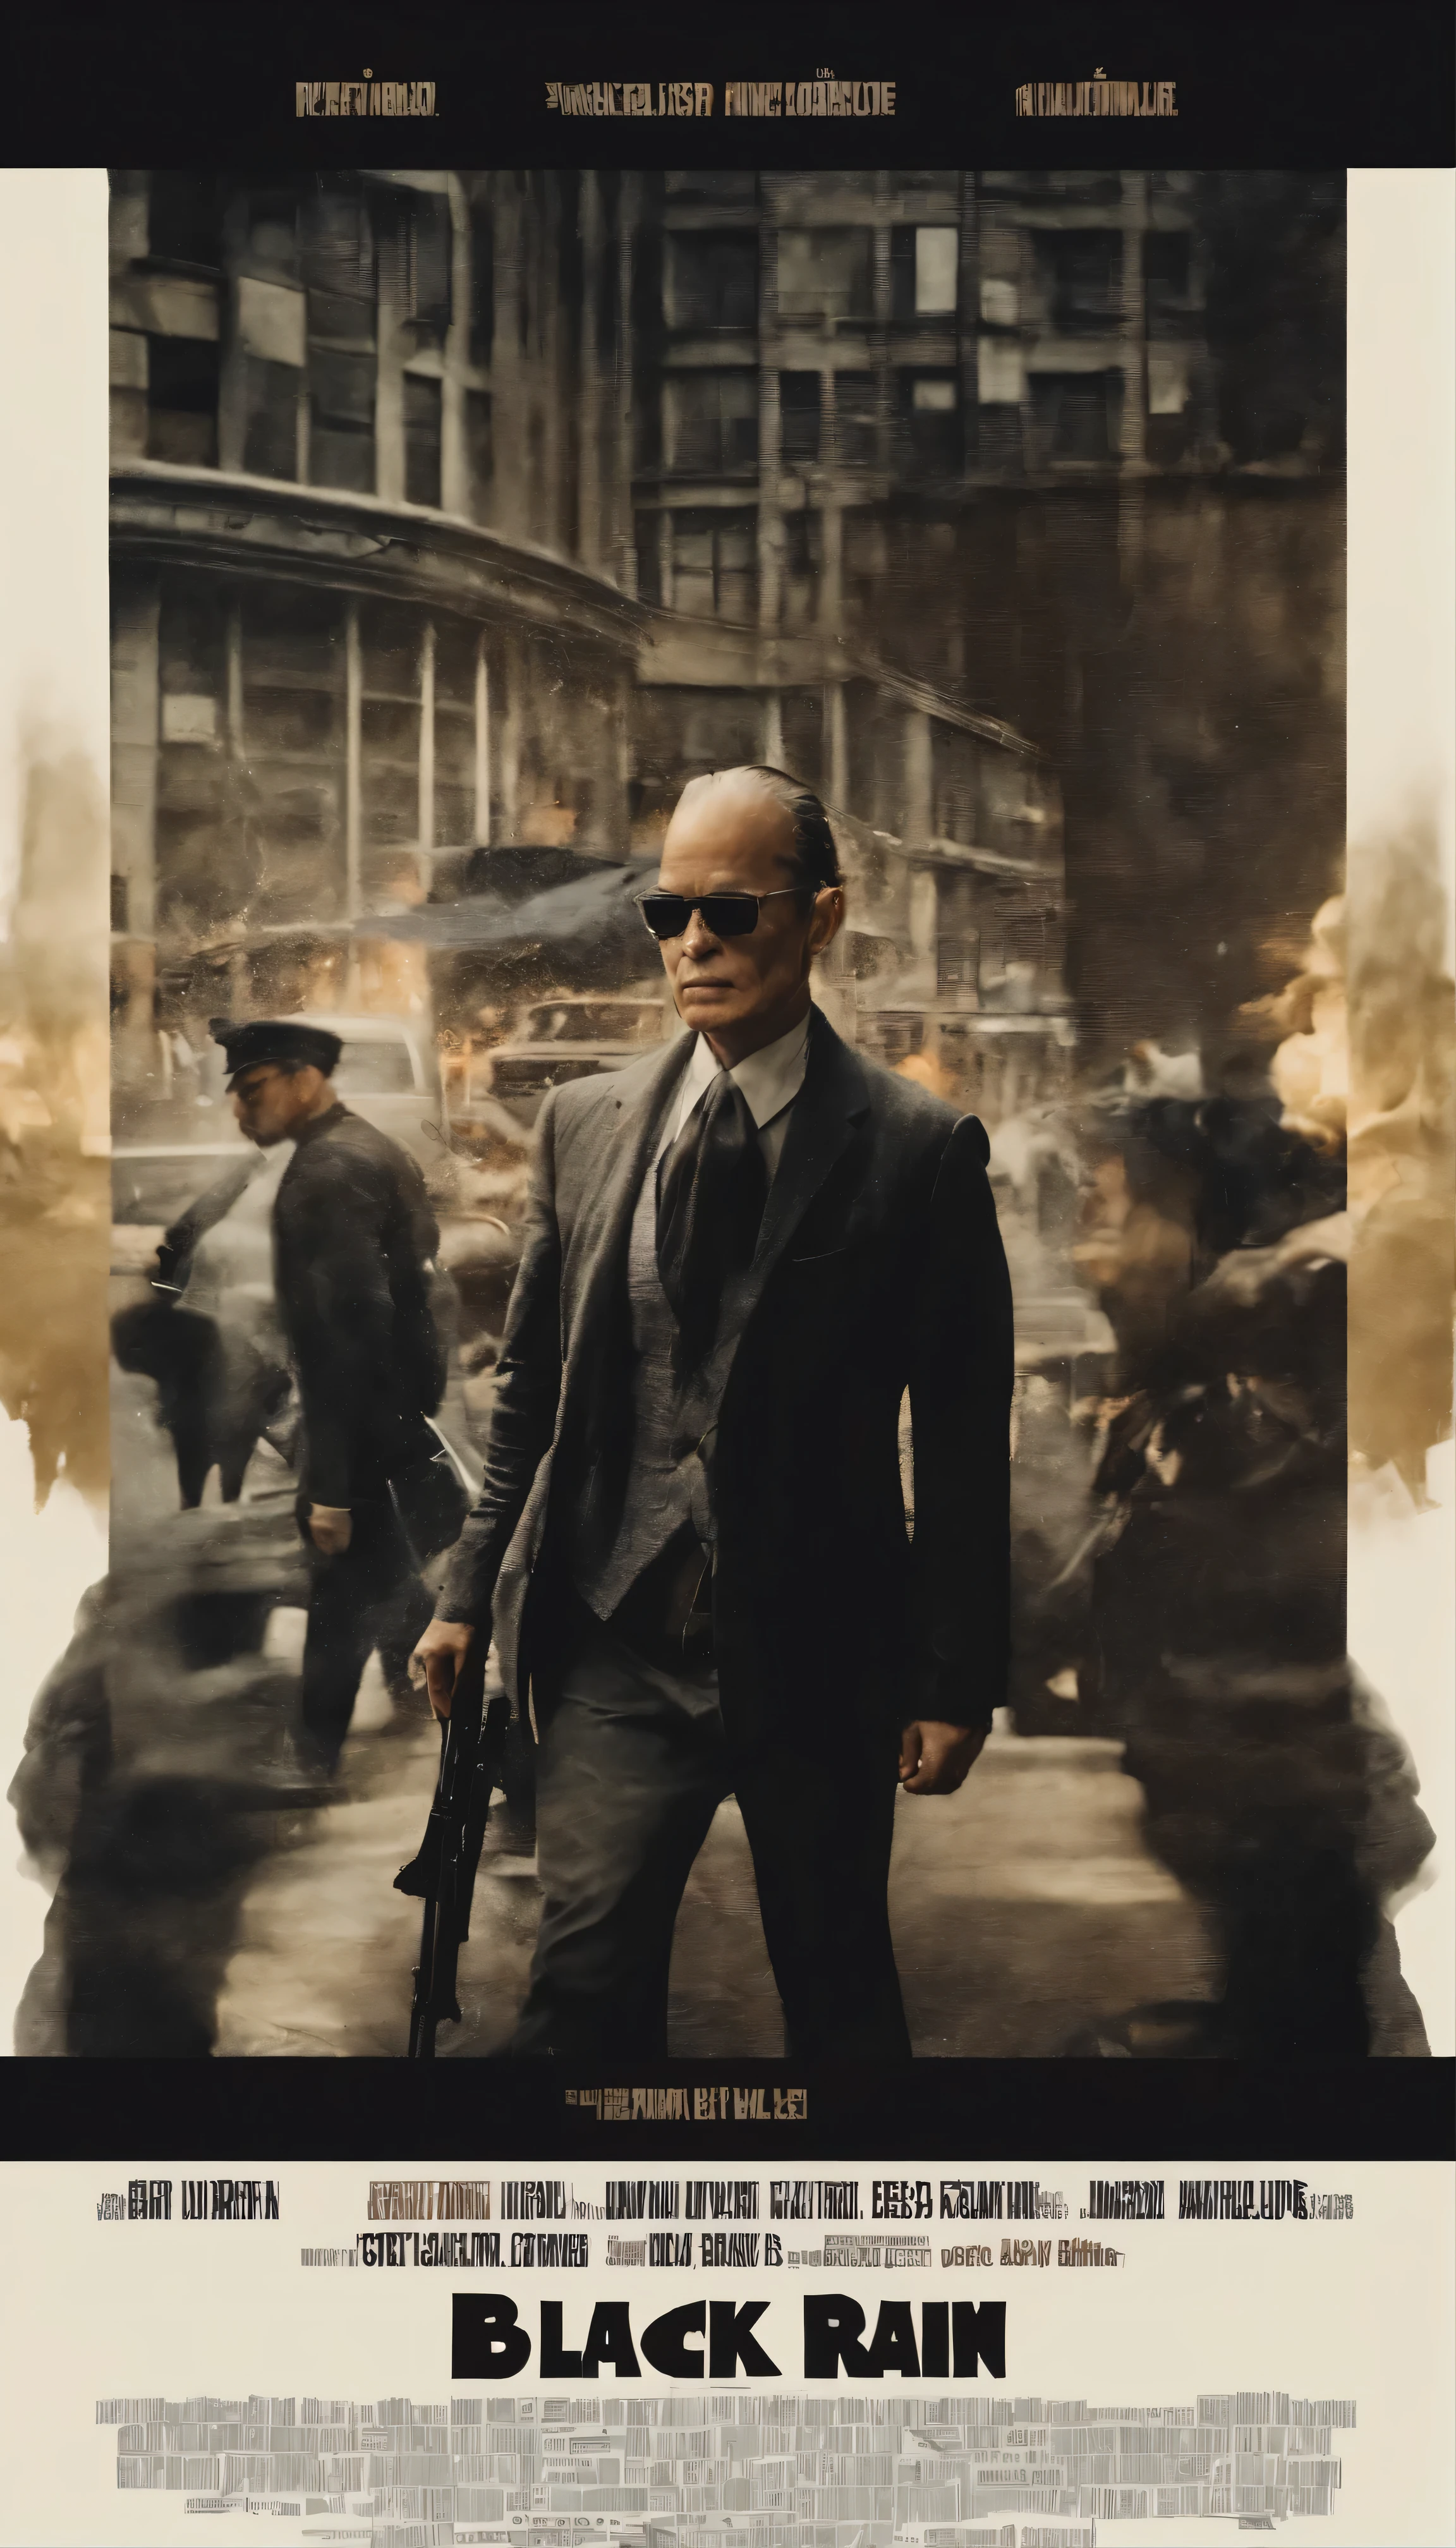 High-definition cinematic scenes that are different from gripping movies、『Black Rain』The fascinating actor、Yusaku Matsuda looks elegant in a black suit and sunglasses.。He is skillfully positioned on his Harley Davidson motorcycle.、I&#39;m holding the gun tightly in both hands.。The footage is、born々exudes a new intensity and authenticity、It embodies the quality and realism that characterize exceptional cinema.。High-definition images that convey a sense of tension